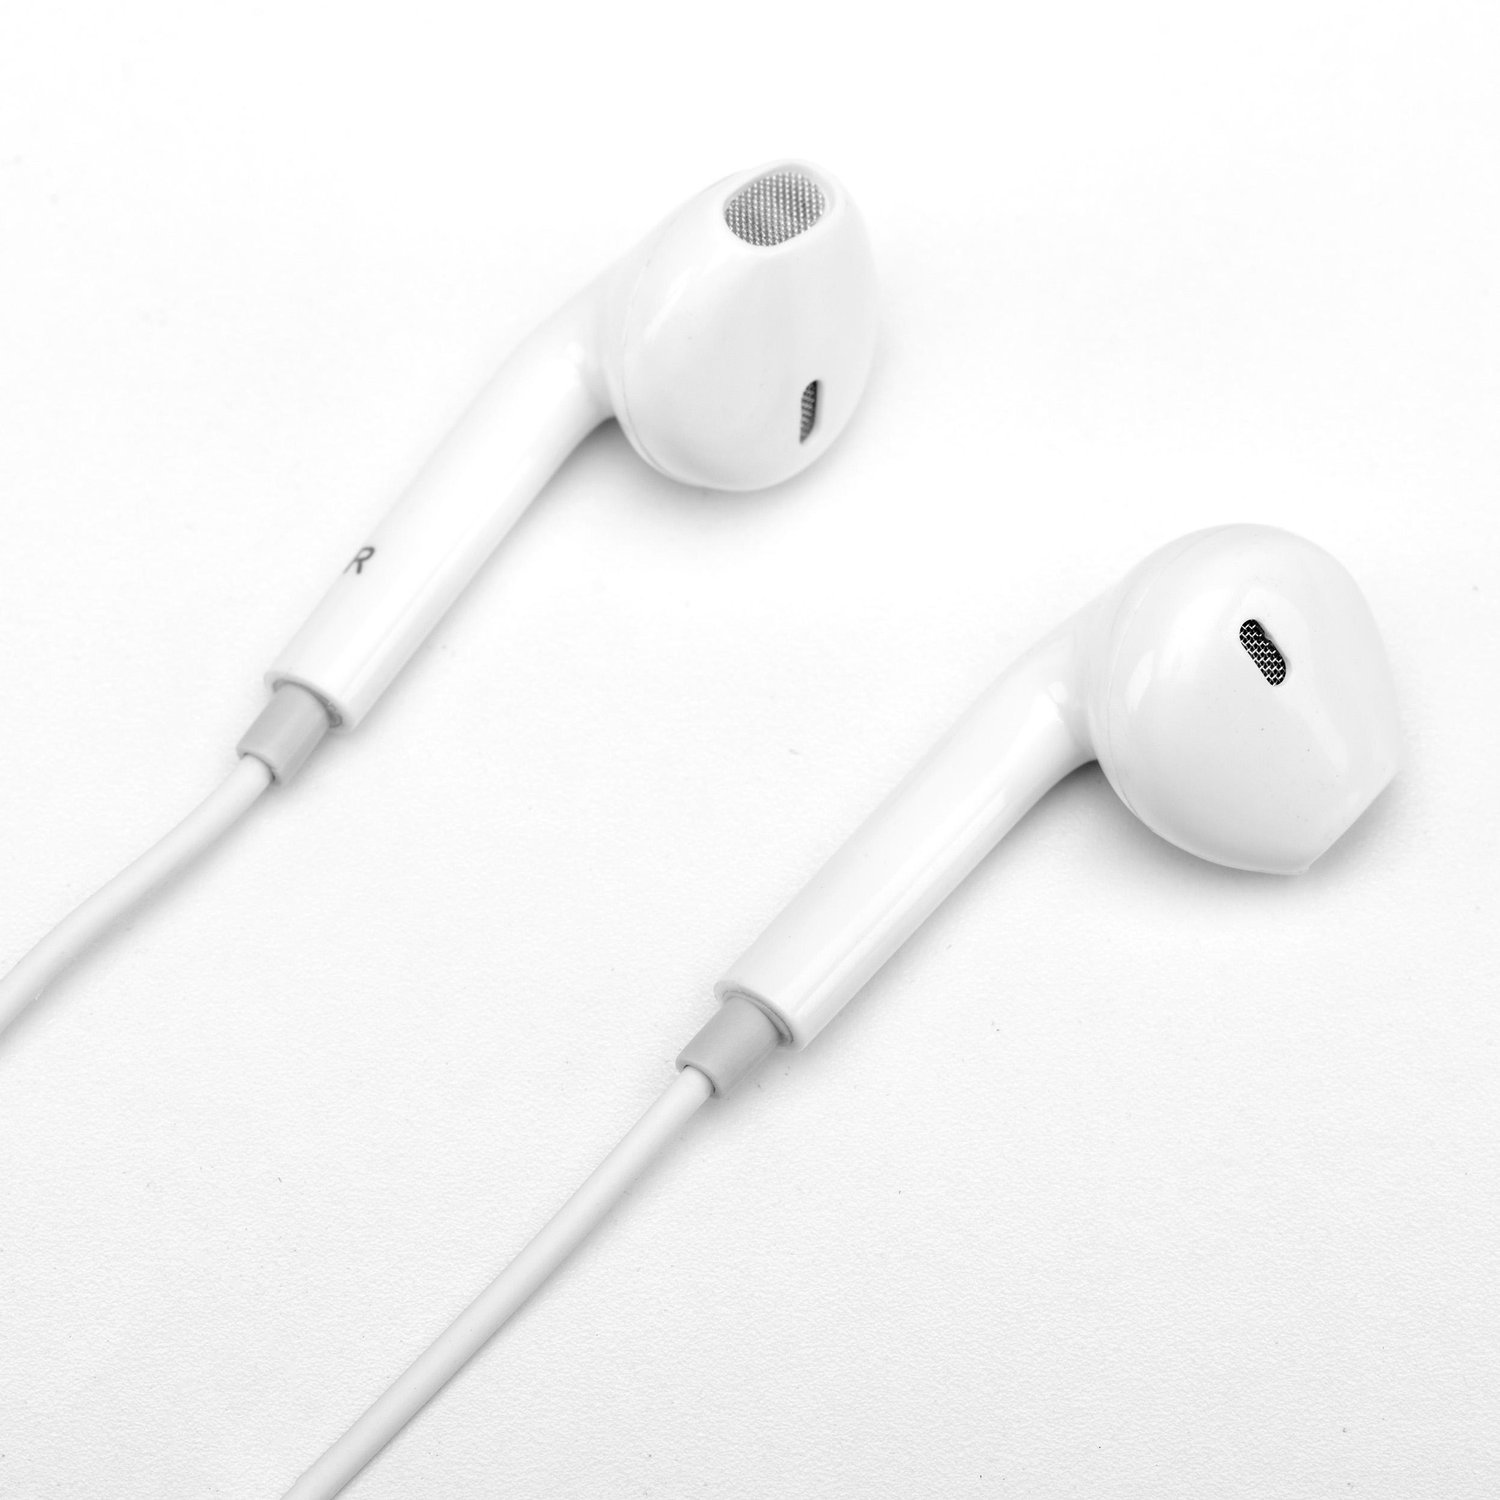 iHip Advanced APP2 Earphones With Built-In Mic - White